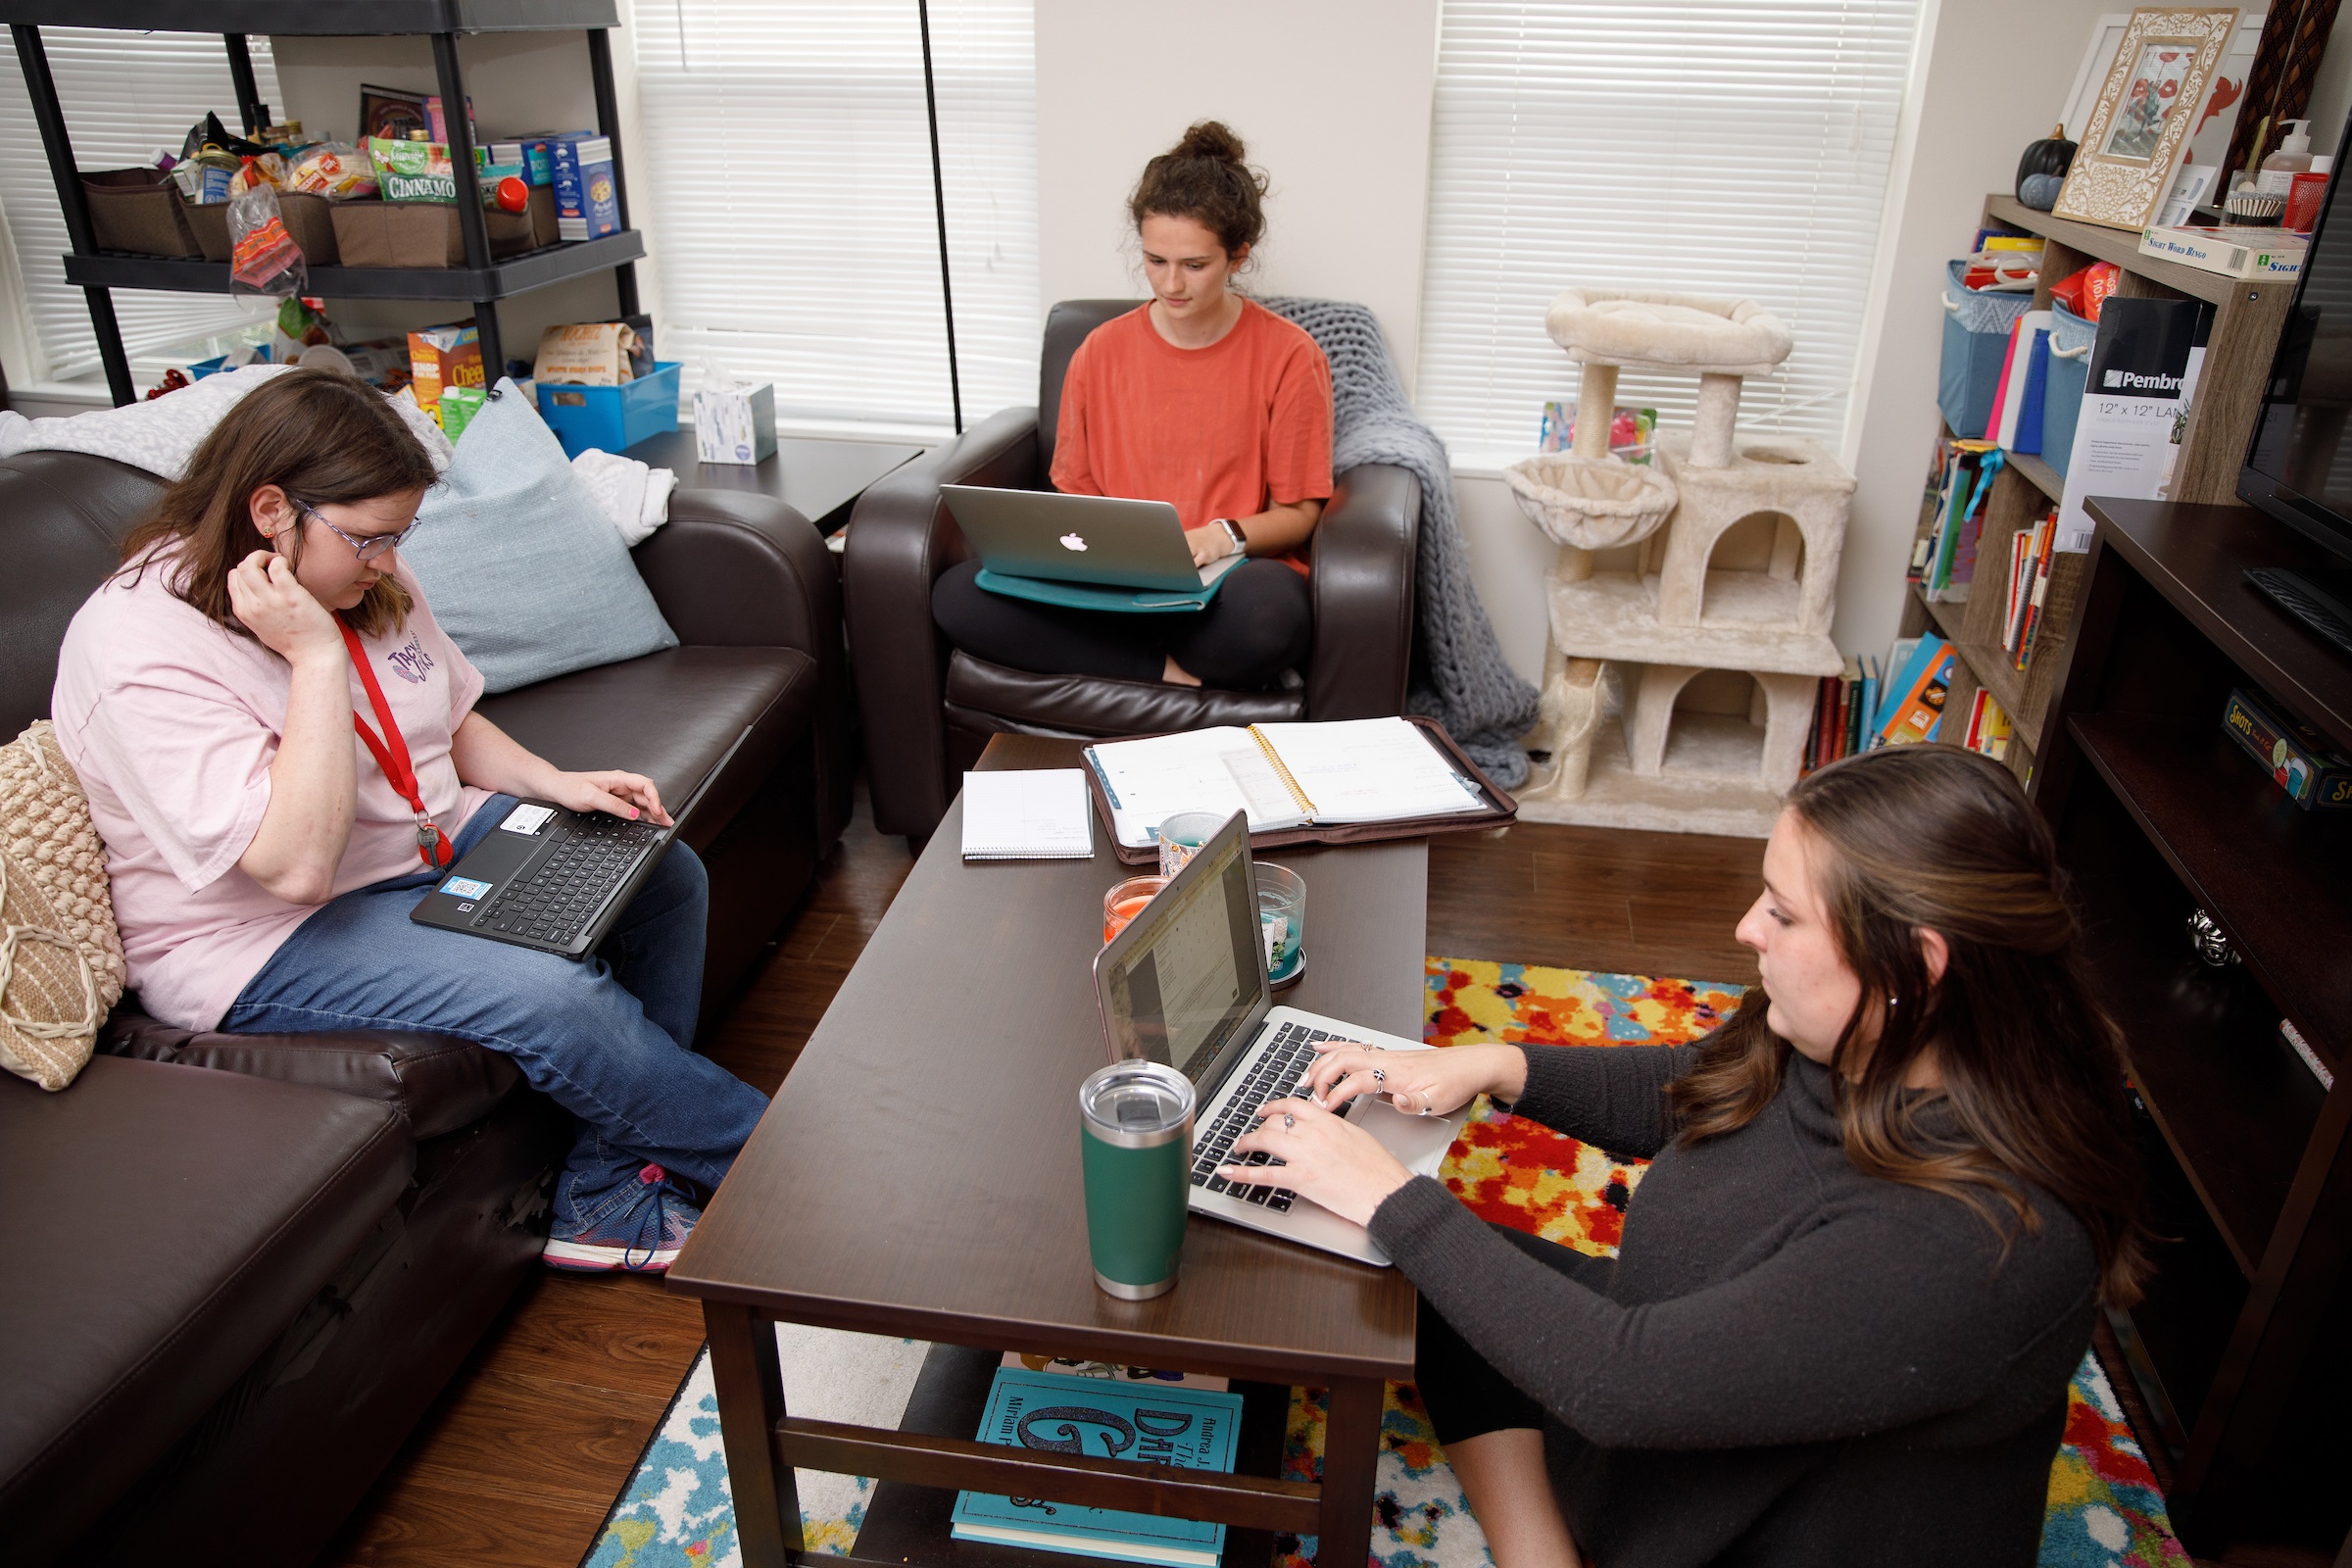 Four women sit in a living room while studying on laptops.